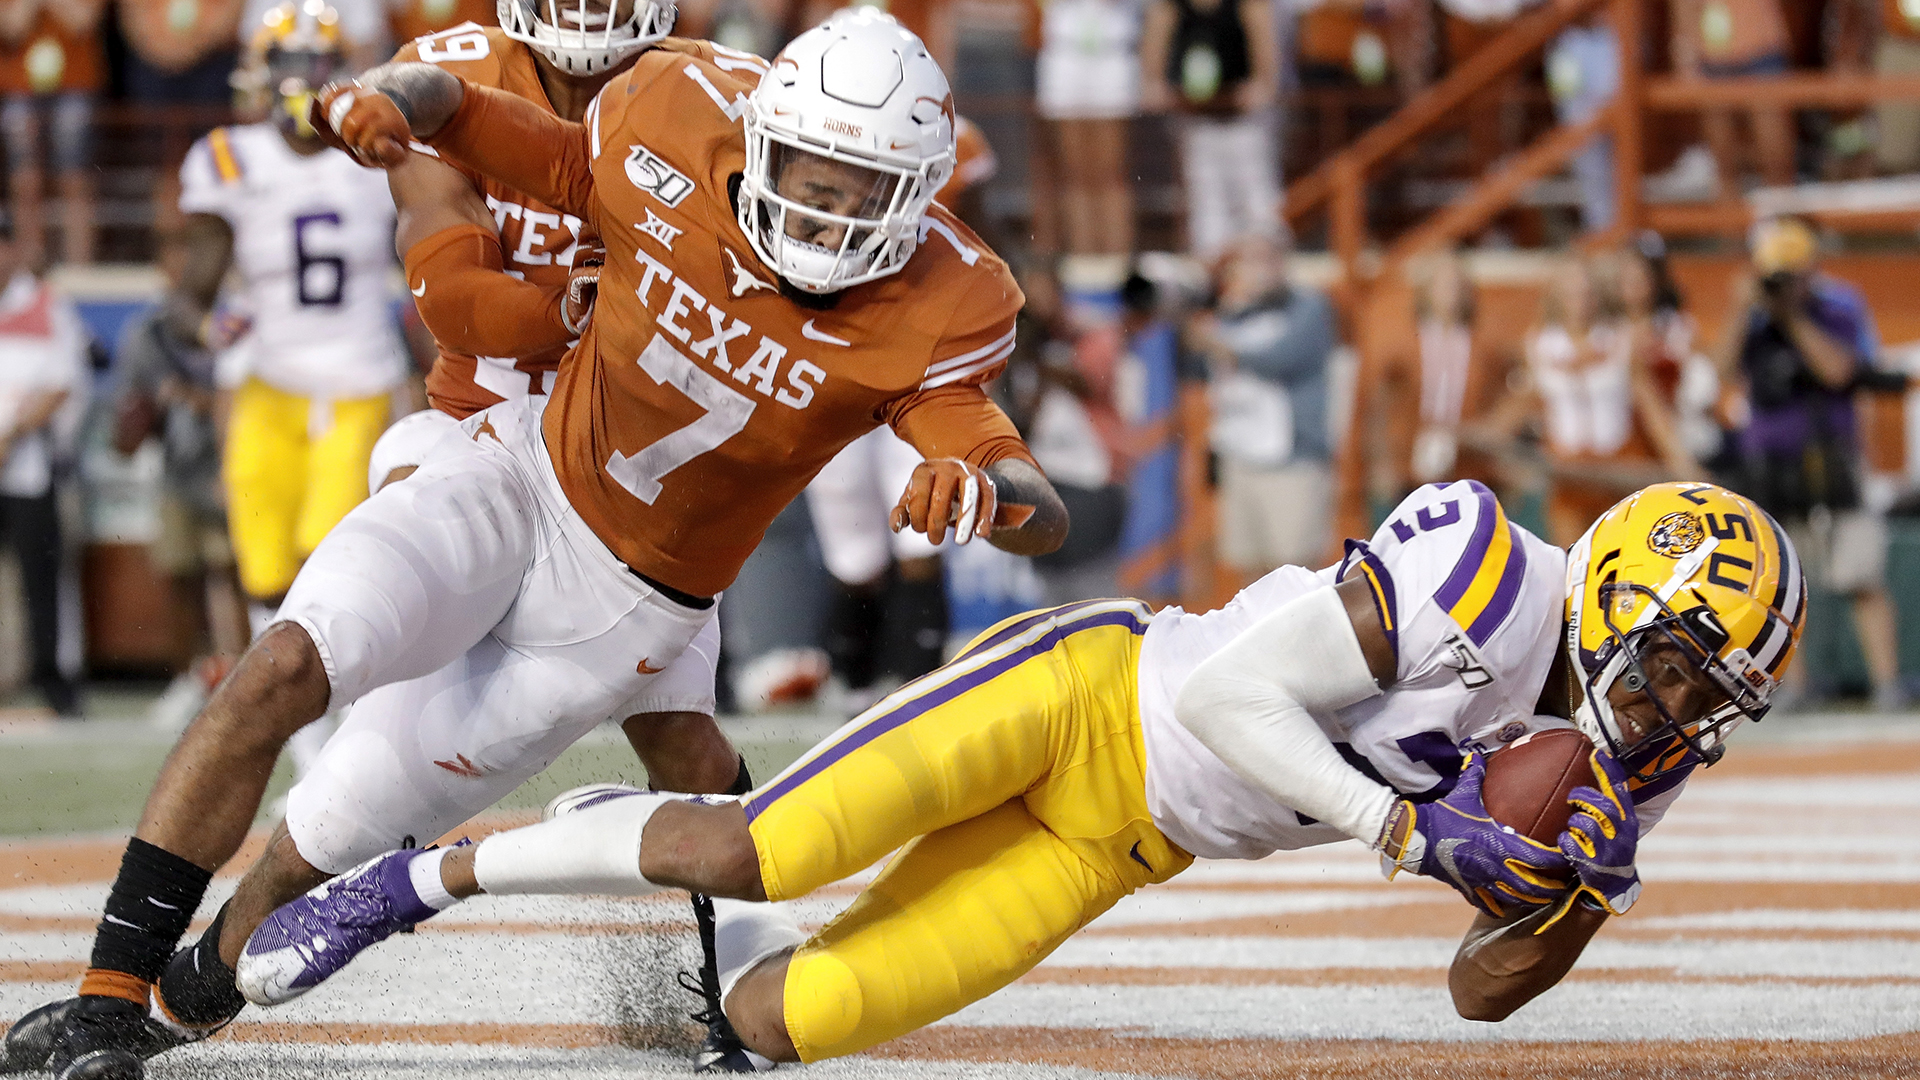 Three takeaways from No. 6 LSU's solid win over No. 9 Texas Sporting News